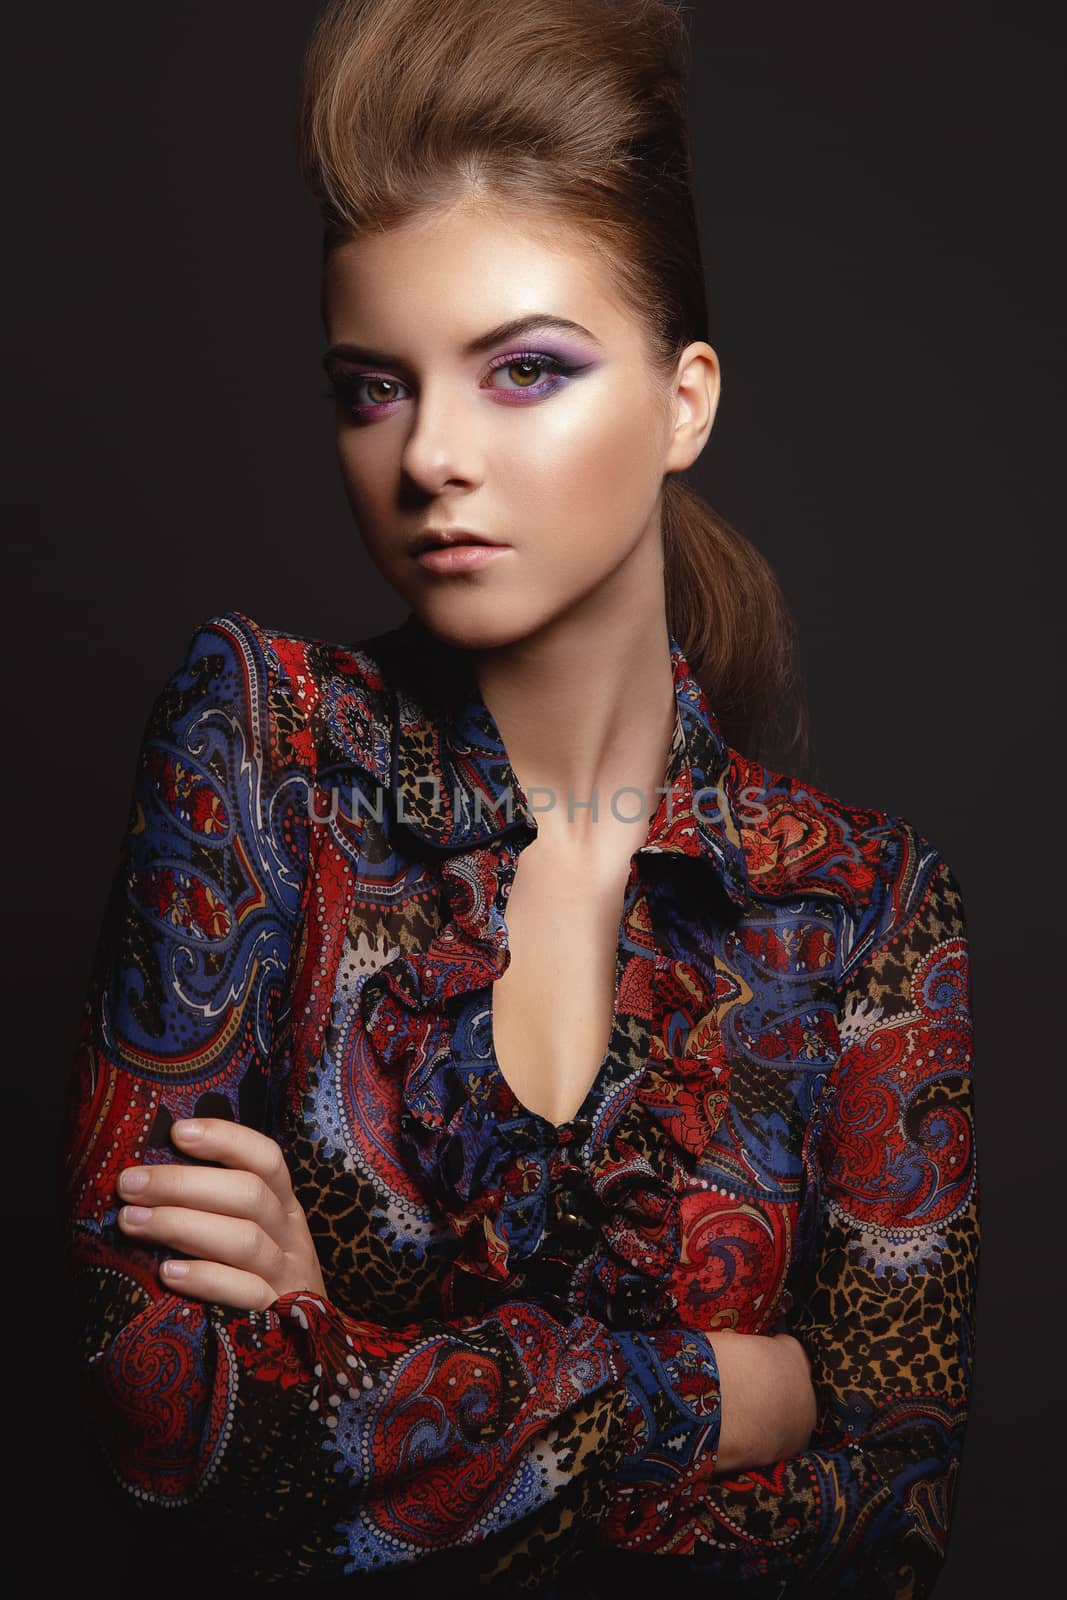 Portrait of beautiful young girl with glamorous evening makeup by Multipedia